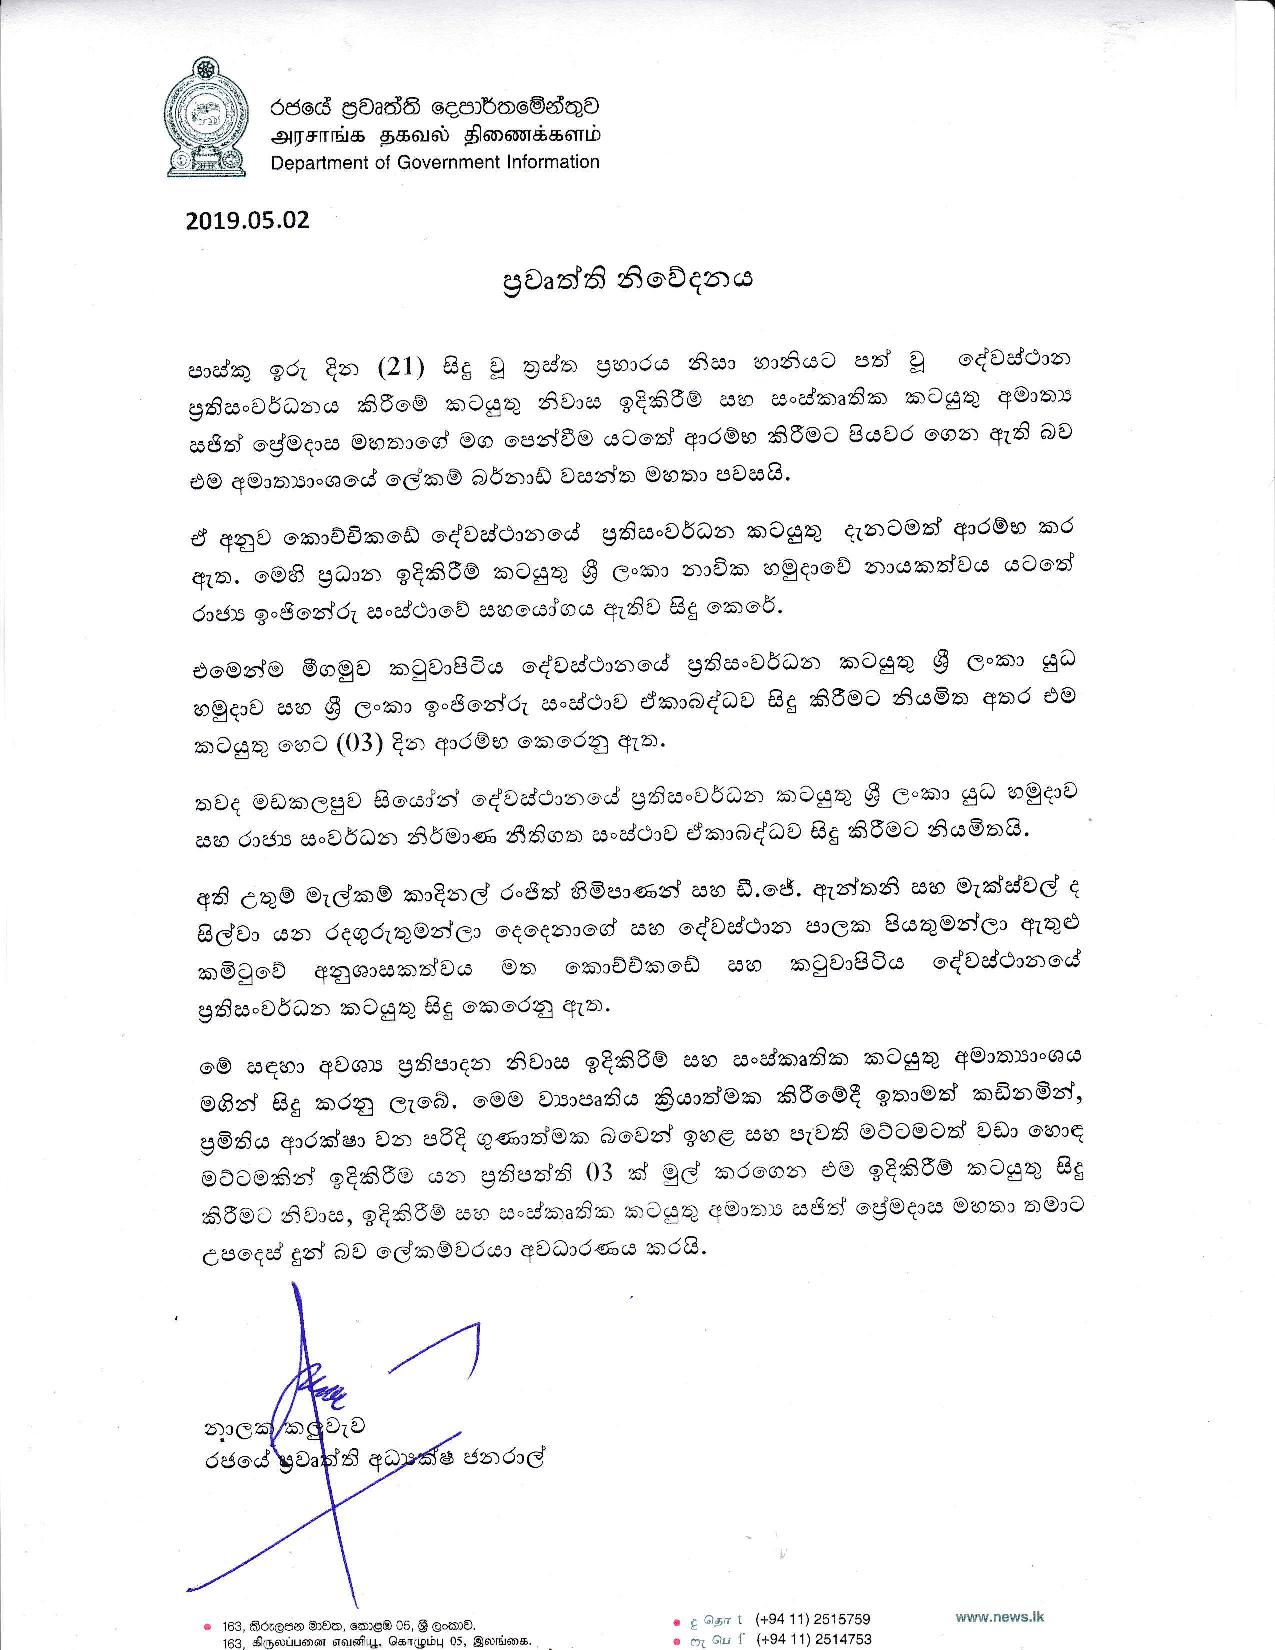 Media Release on 02.05.2019 page 001